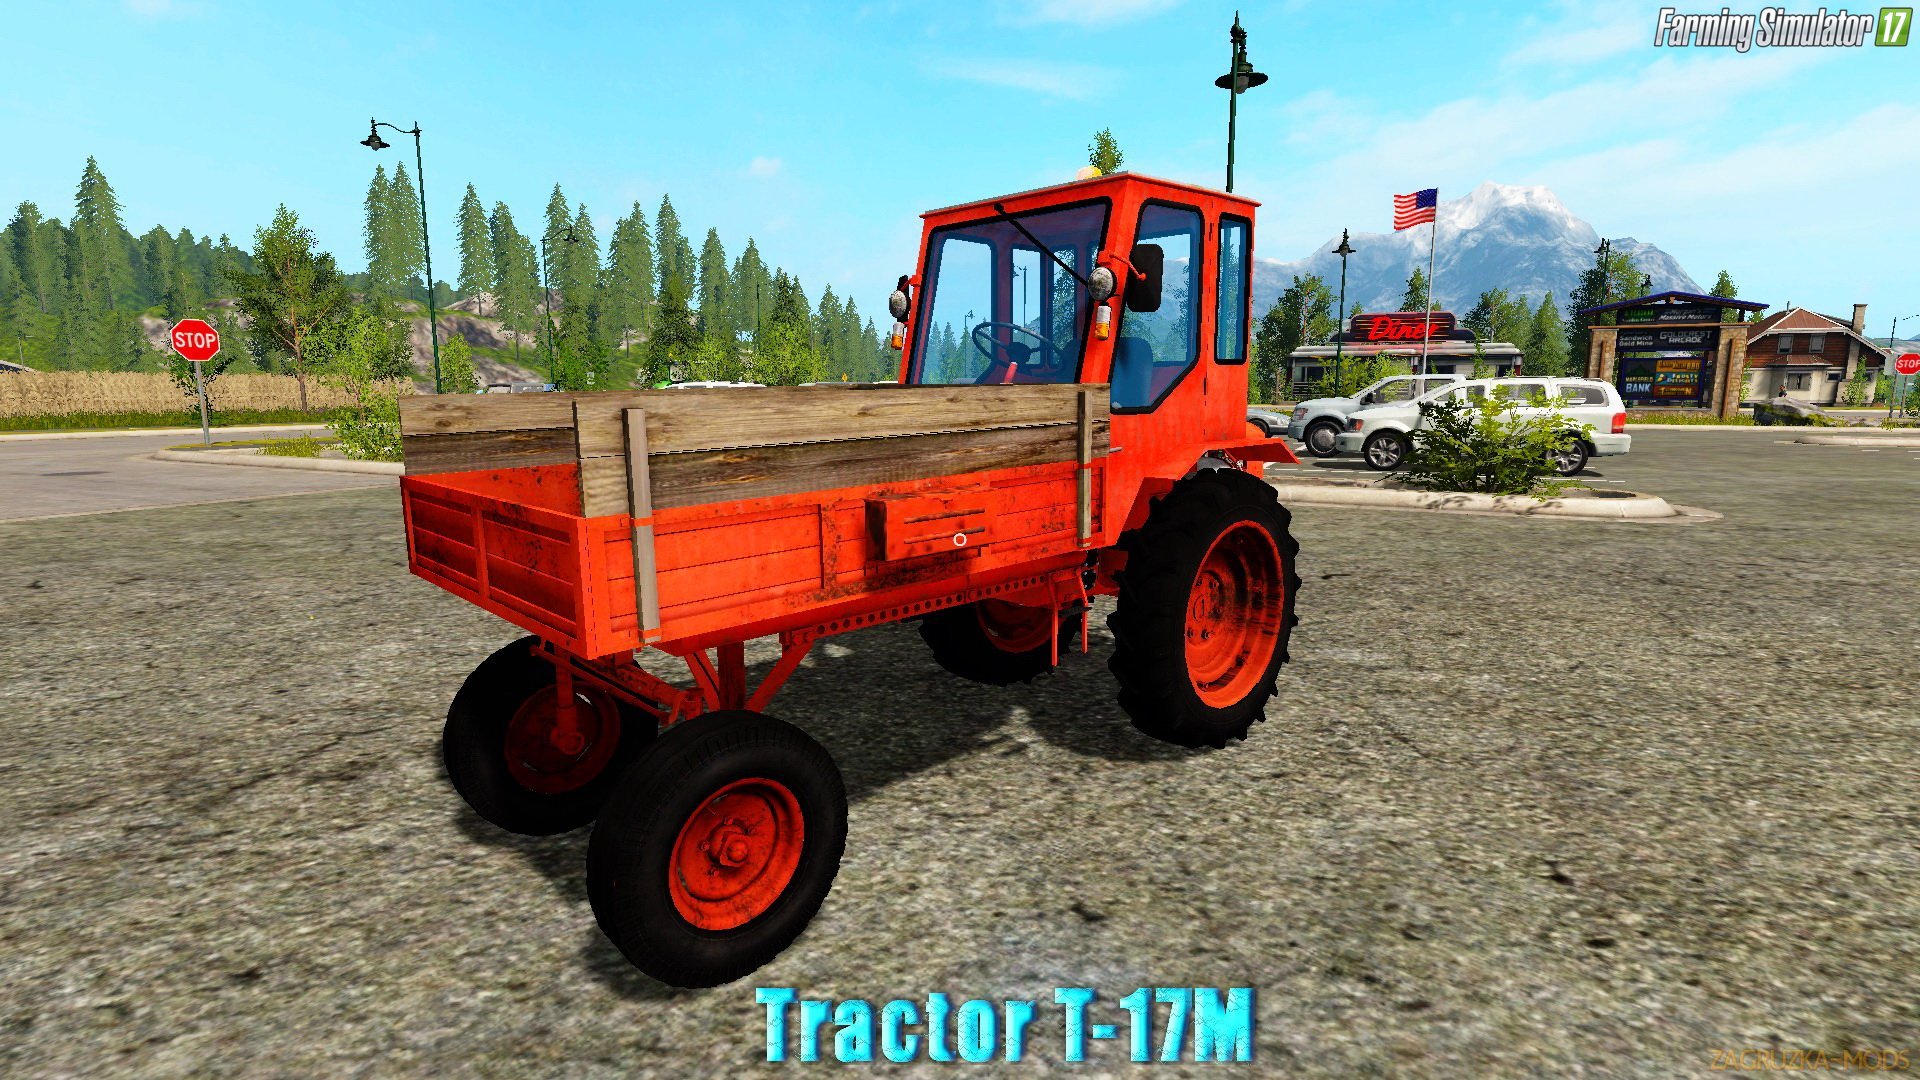 Tractor T-17M v1.0 for FS 17